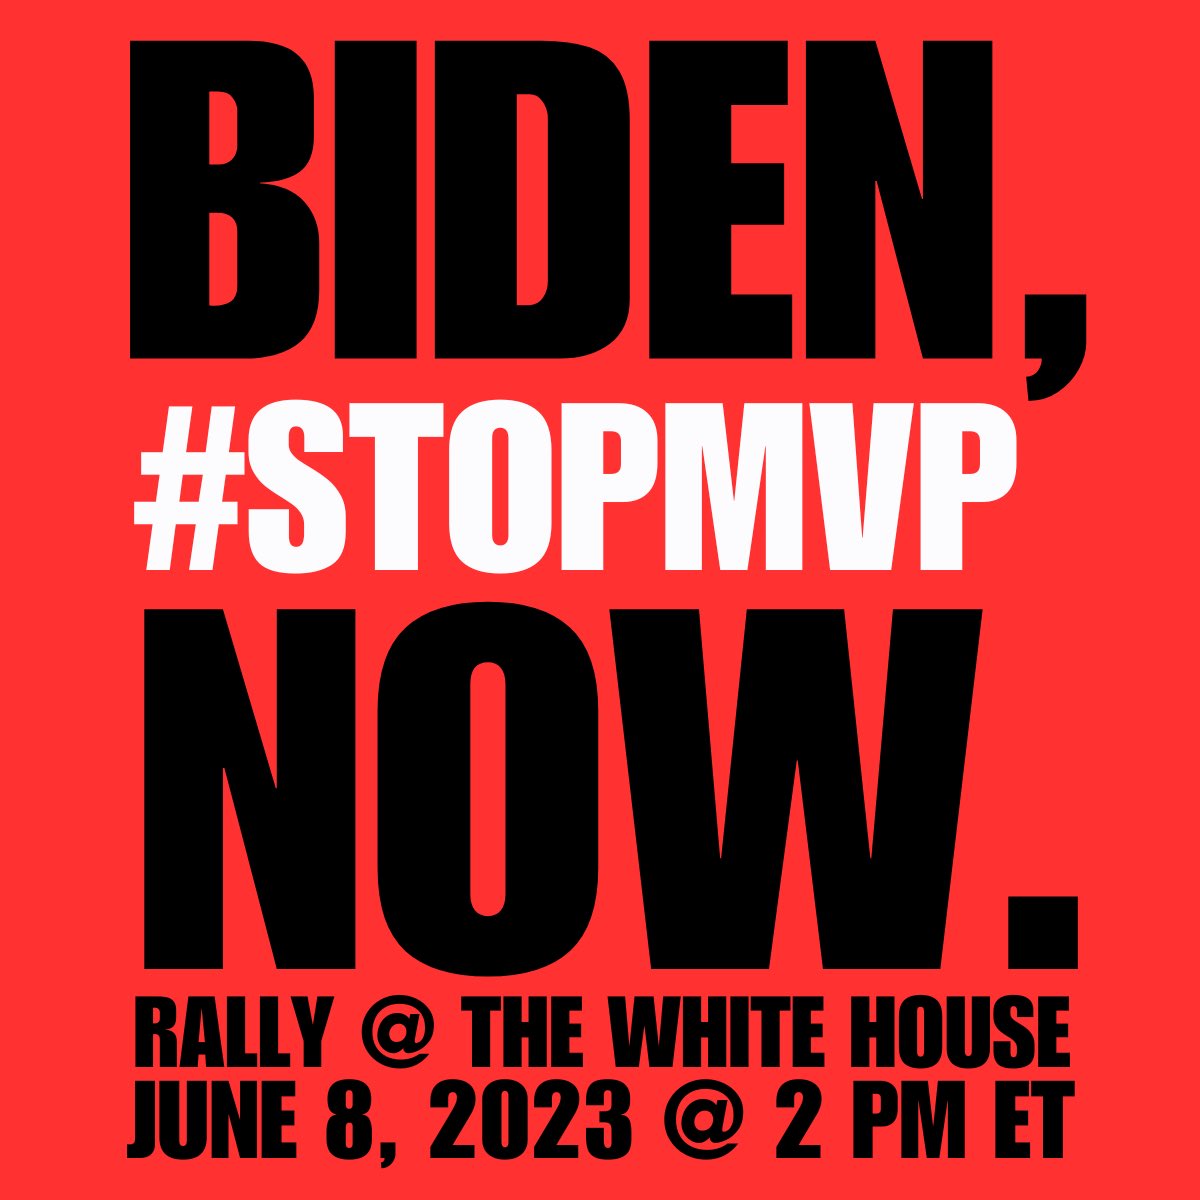 The sky is on fire and @potus is taking a victory lap to celebrate a dirty #DebtCeilingAgreement that fast tracks #FossilFuels. Hey @alizaidi46 @johnpodesta, you cowards, come meet us outside tomorrow at 2pm. #StopMVP no more #climatecowards